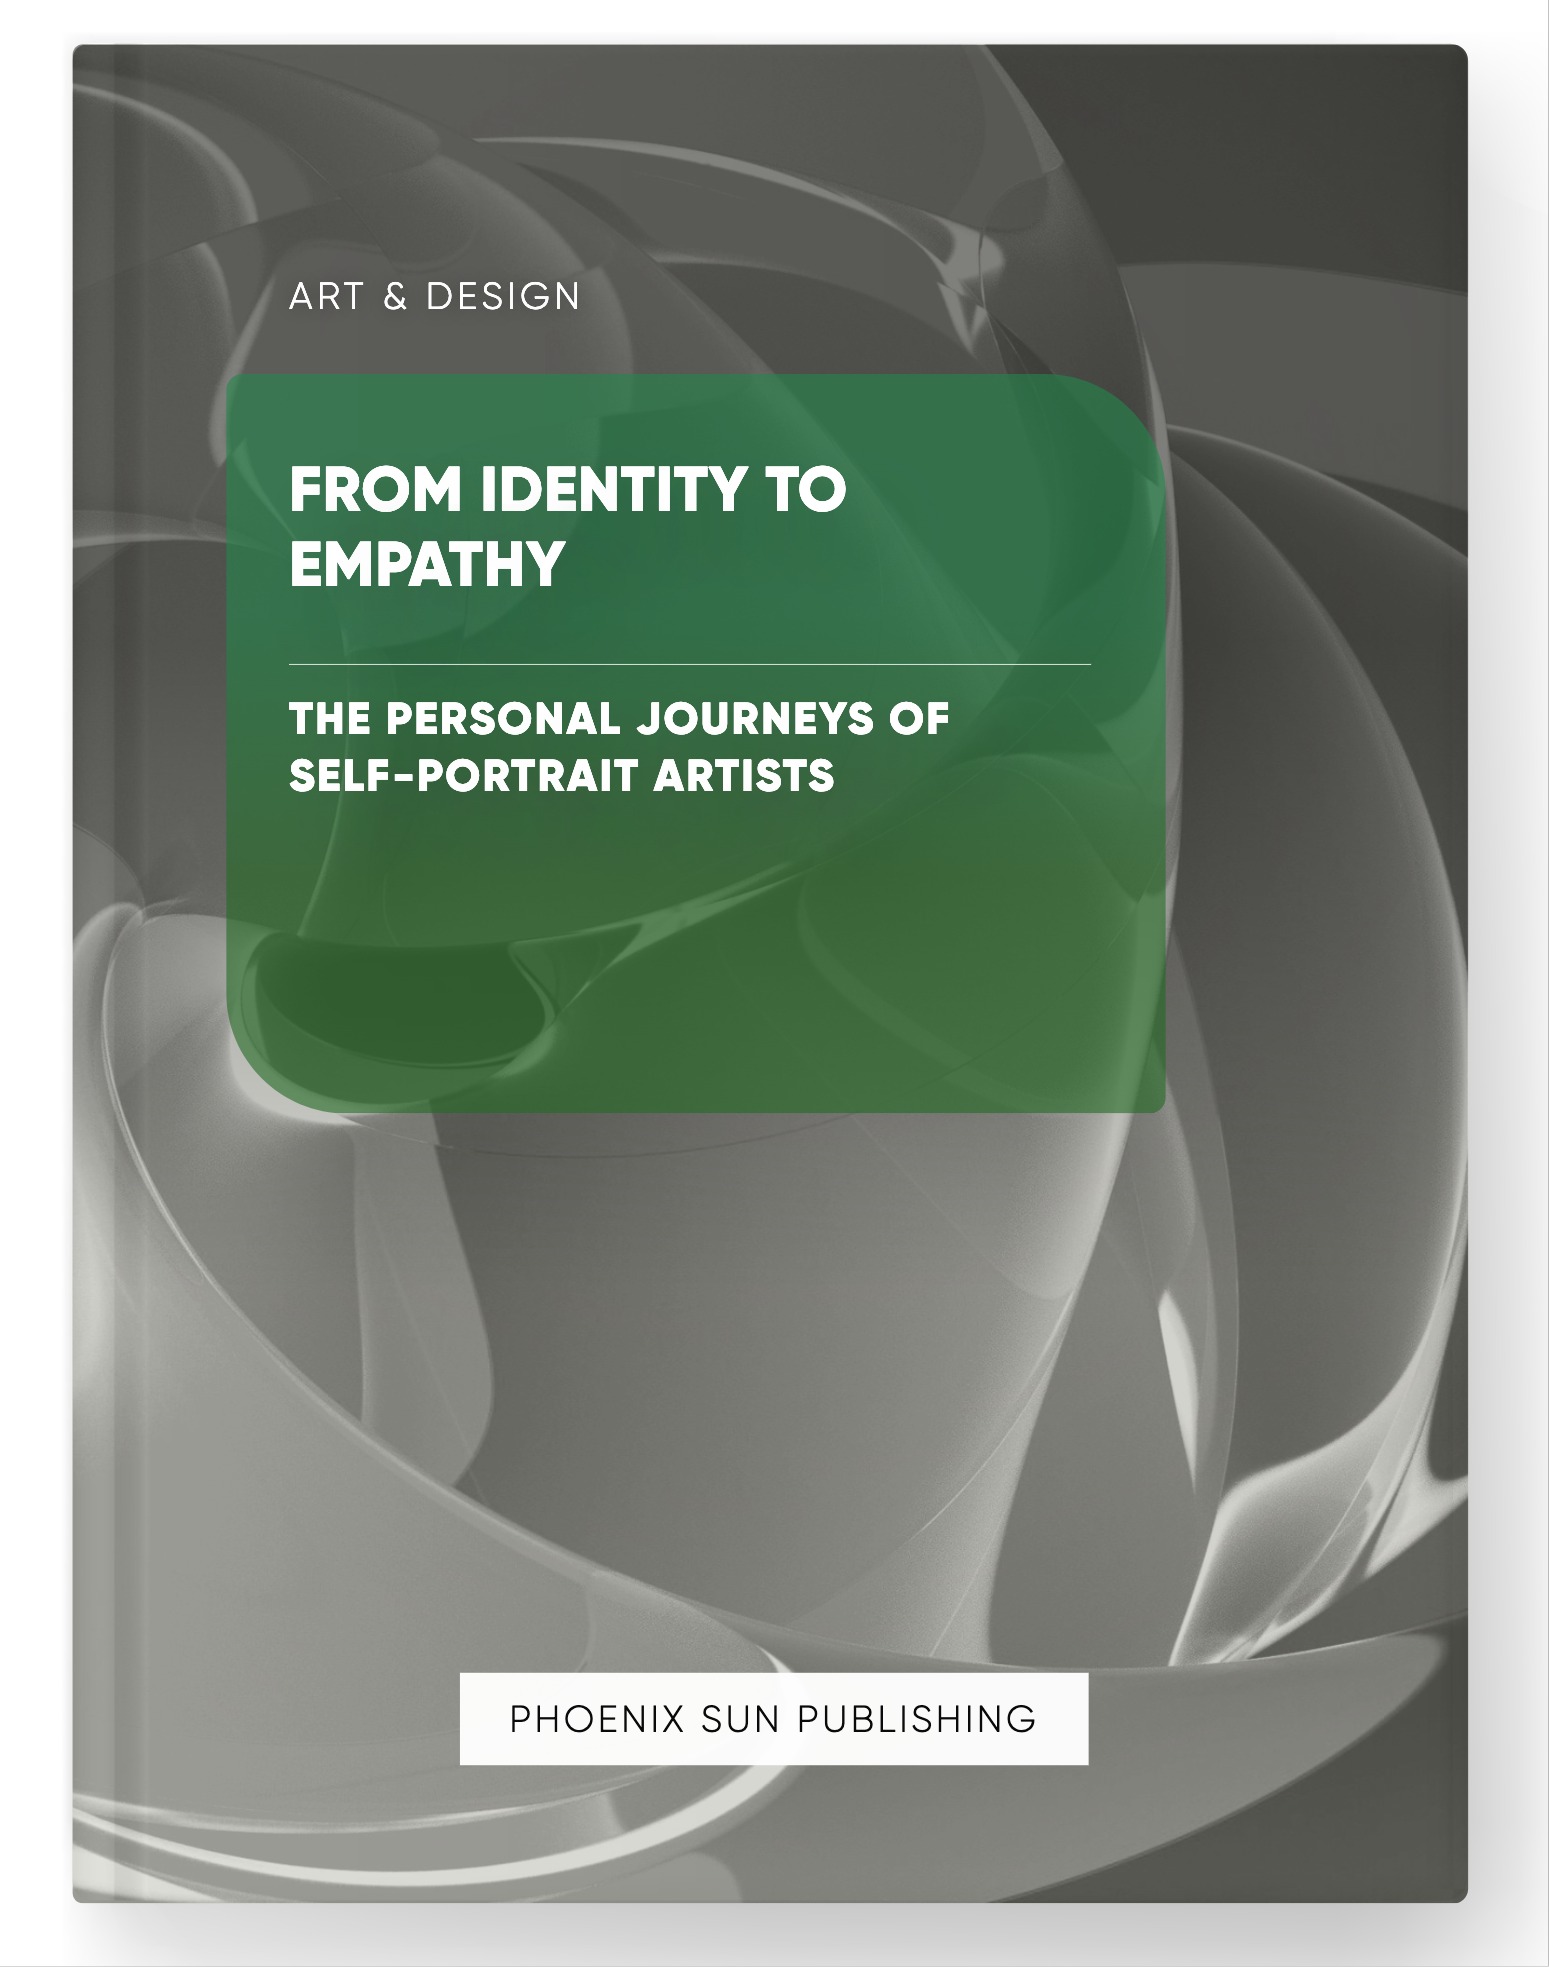 From Identity to Empathy – The Personal Journeys of Self-Portrait Artists